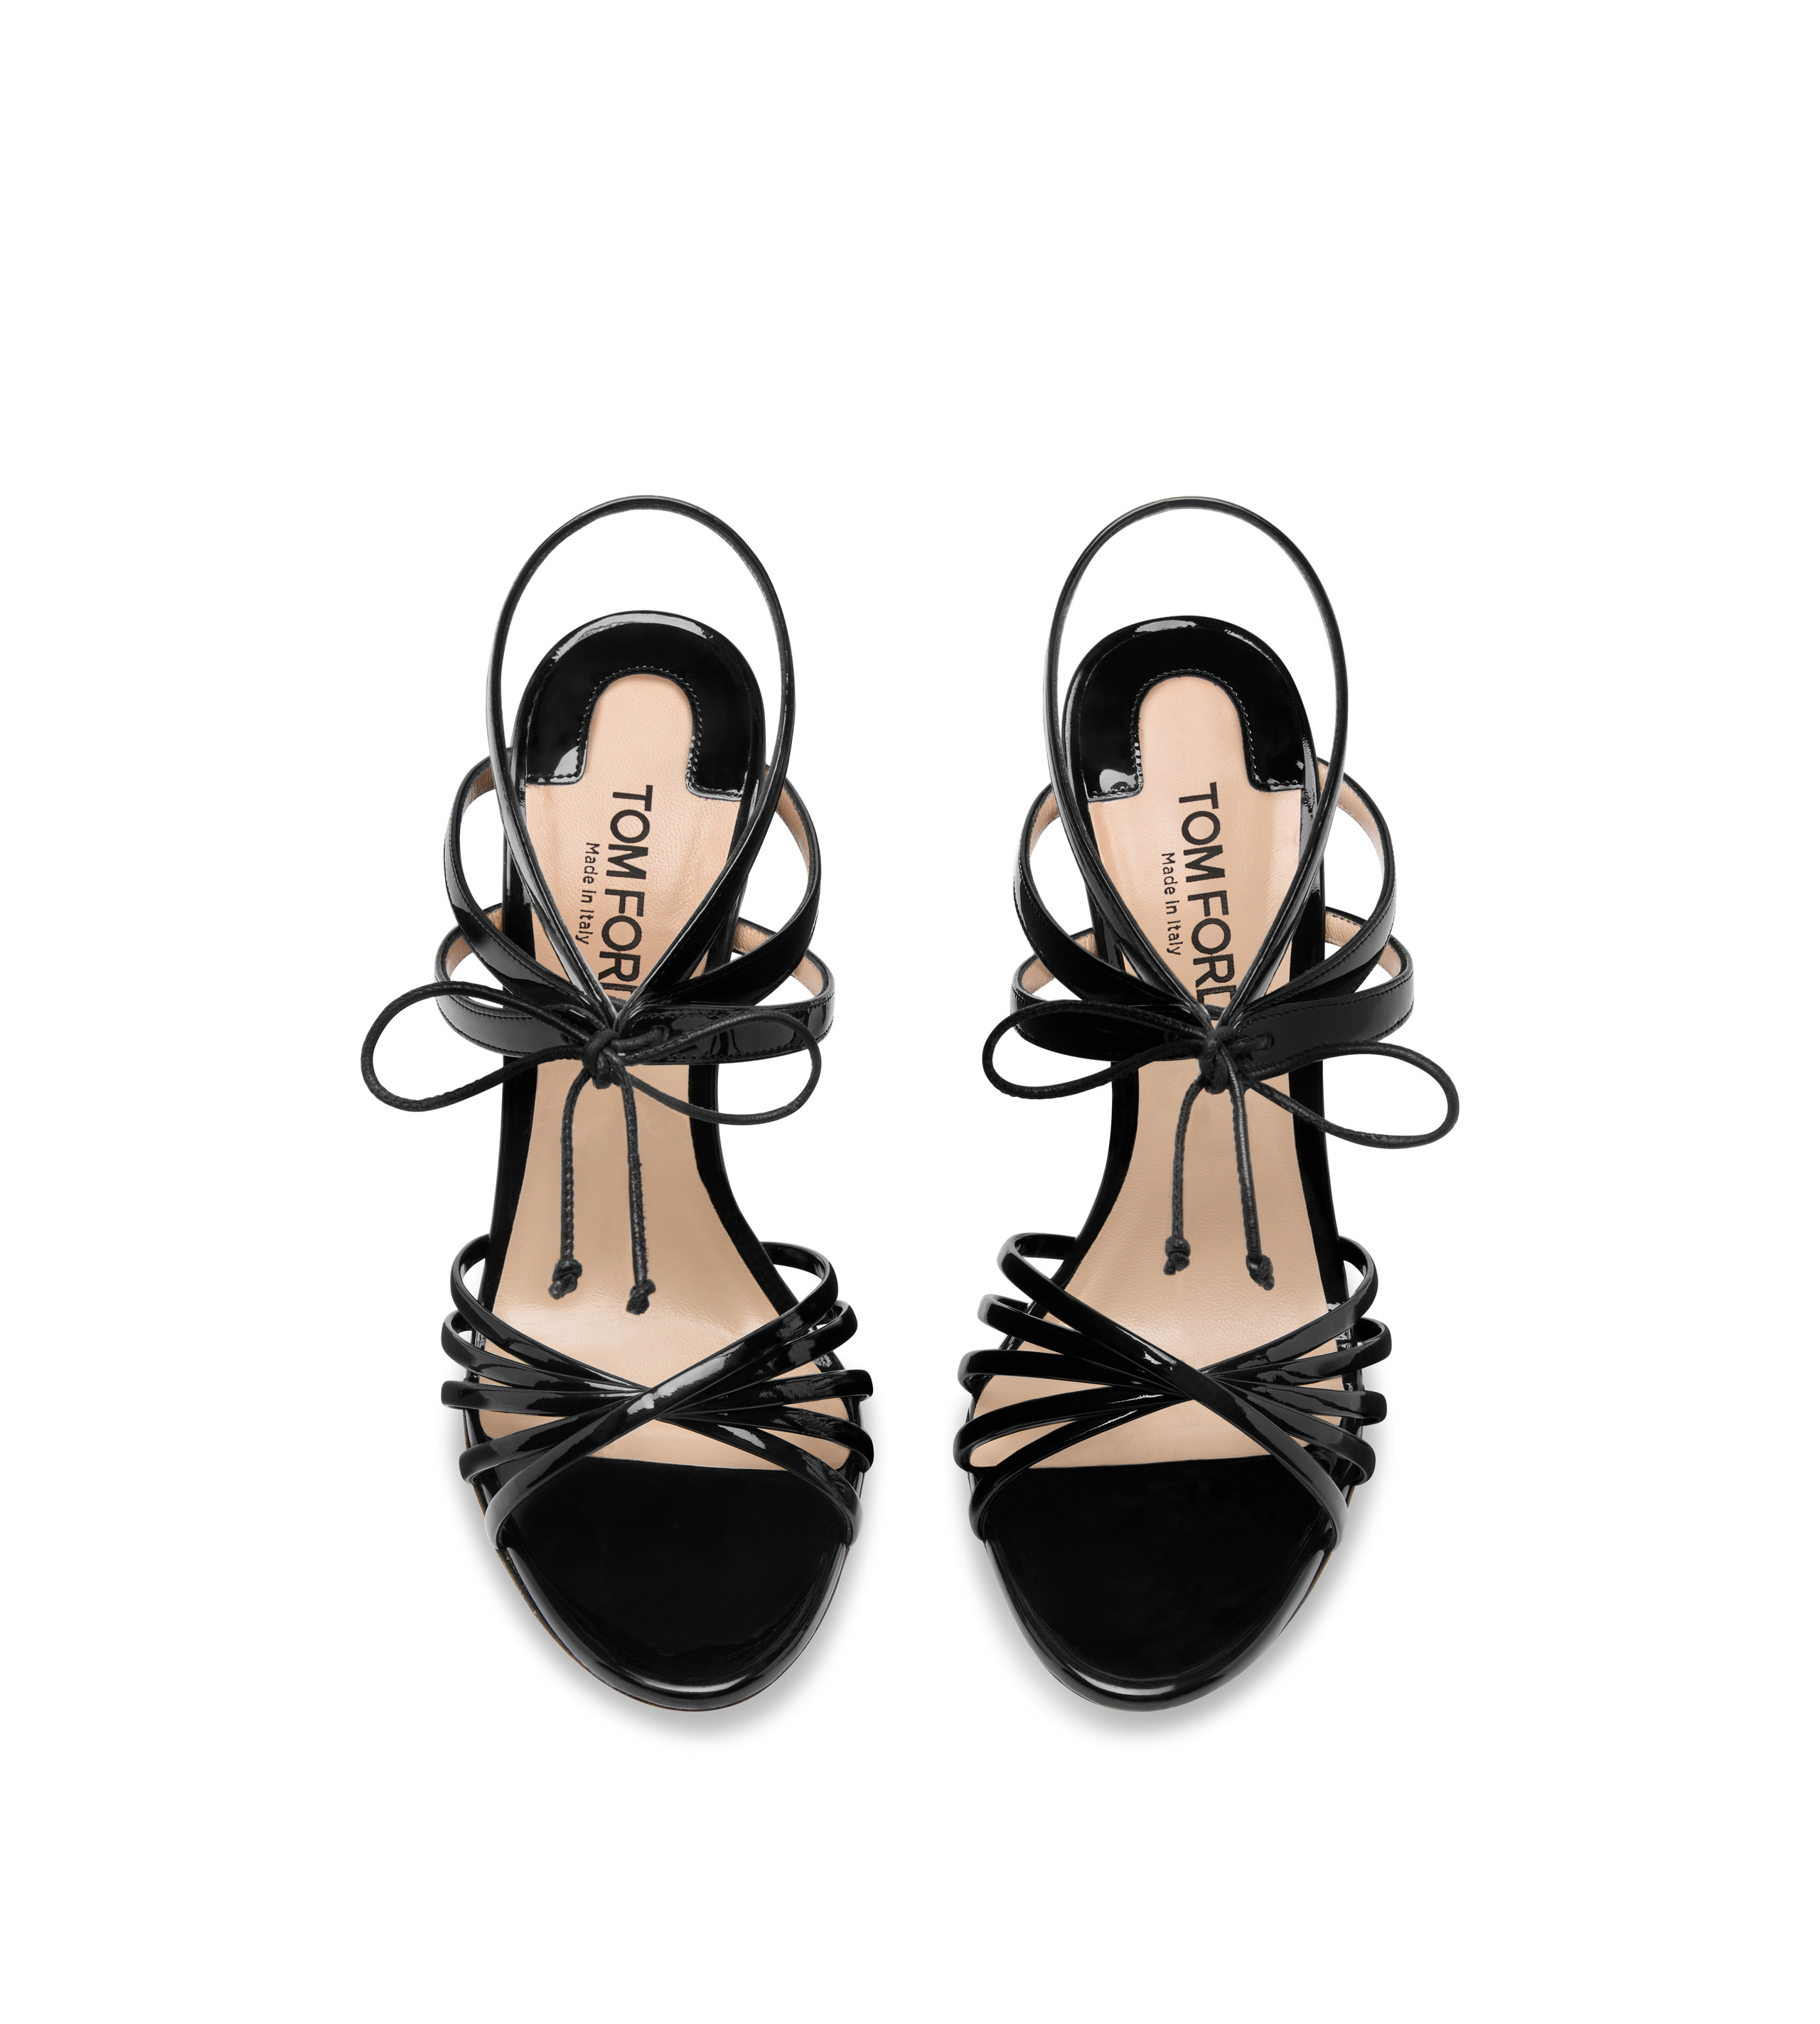 PATENT LEATHER ANGELICA SANDAL - 4